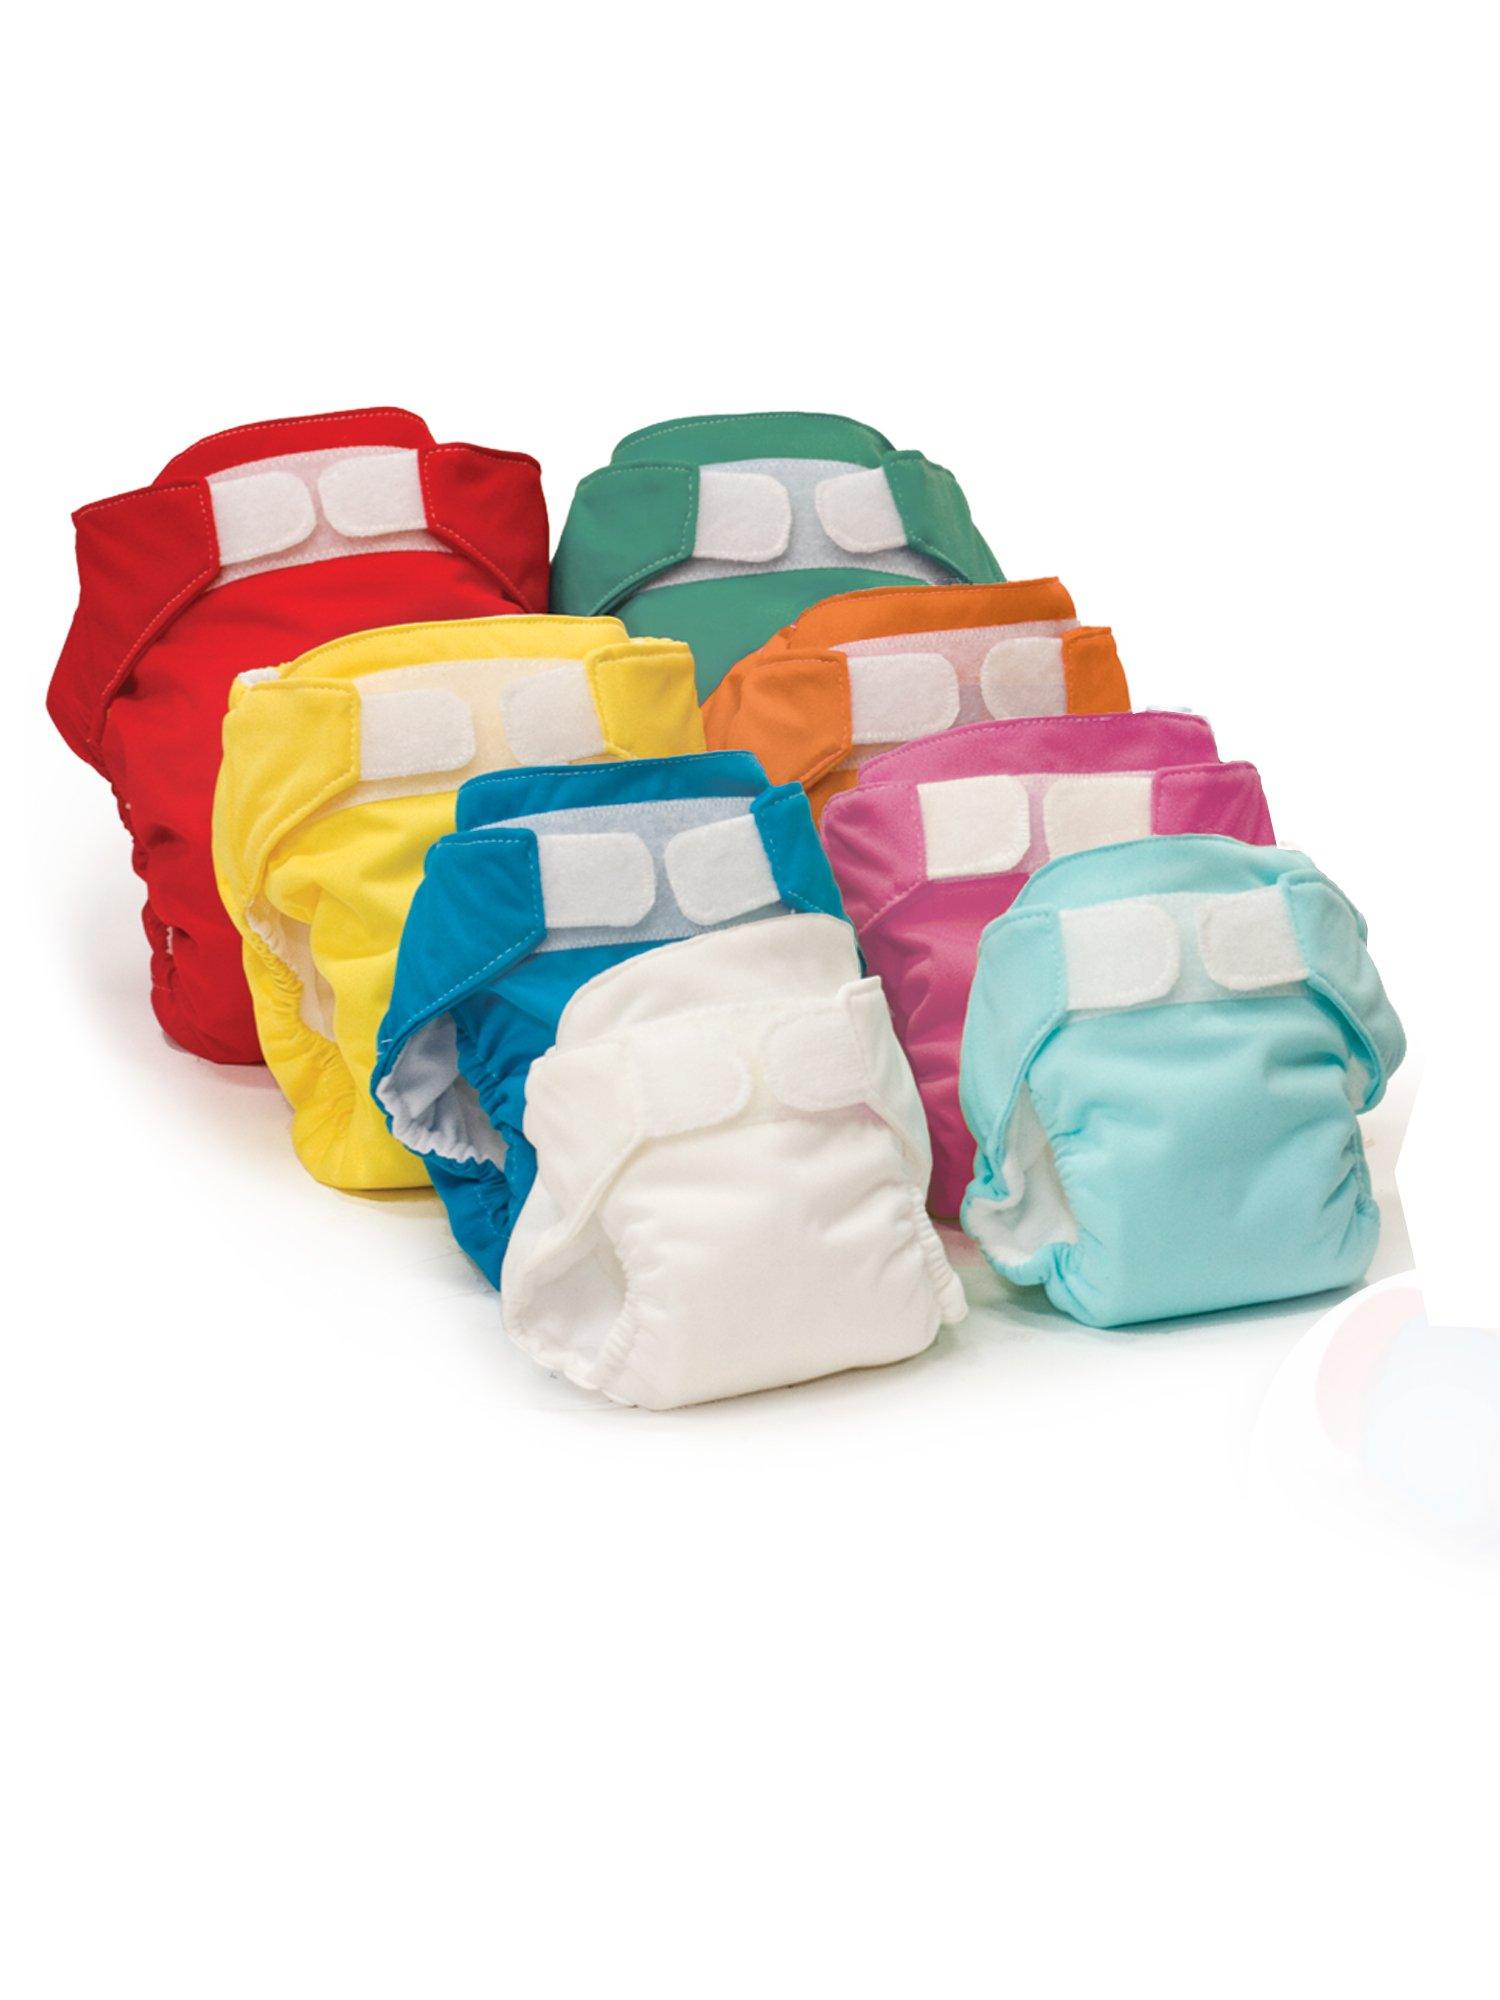 Jalie 2907 - Pocket and All-in-one Cloth Diaper Pattern in 8 sizes